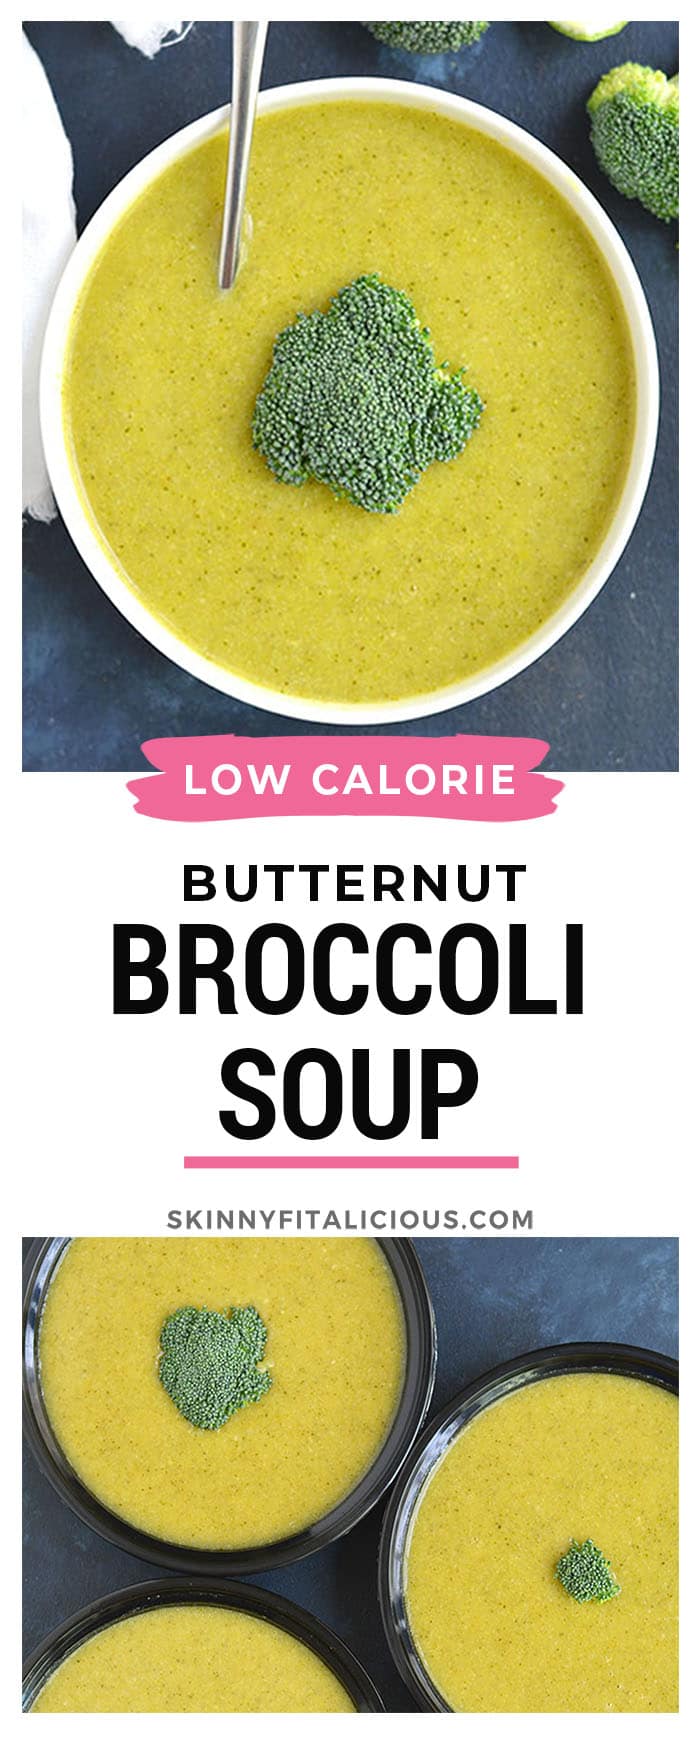 Meal Prep Broccoli Butternut Soup. This lighter, dairy-free soup is a healthier version of broccoli cheddar soup that's equally creamy and delicious! A veggie packed meal perfect for cold weather